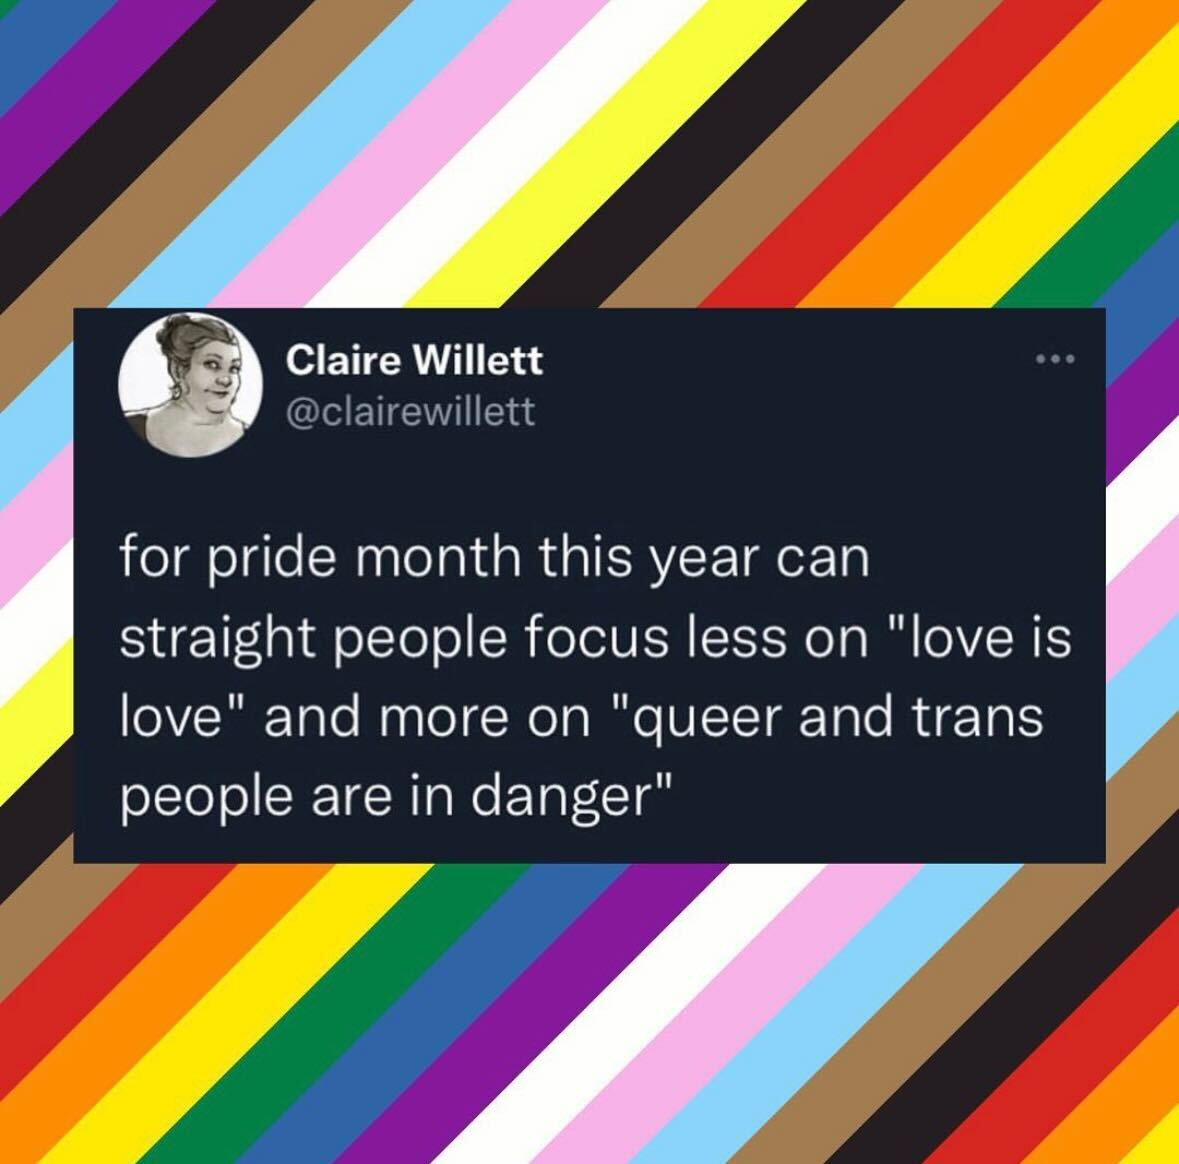 Black background tweet with white text from Claire Willett: "for pride month this year can straight people focus less on "love is love" and more on "queer and trans lives are in danger" against the diagonal stripes of the trans and pride flags. 